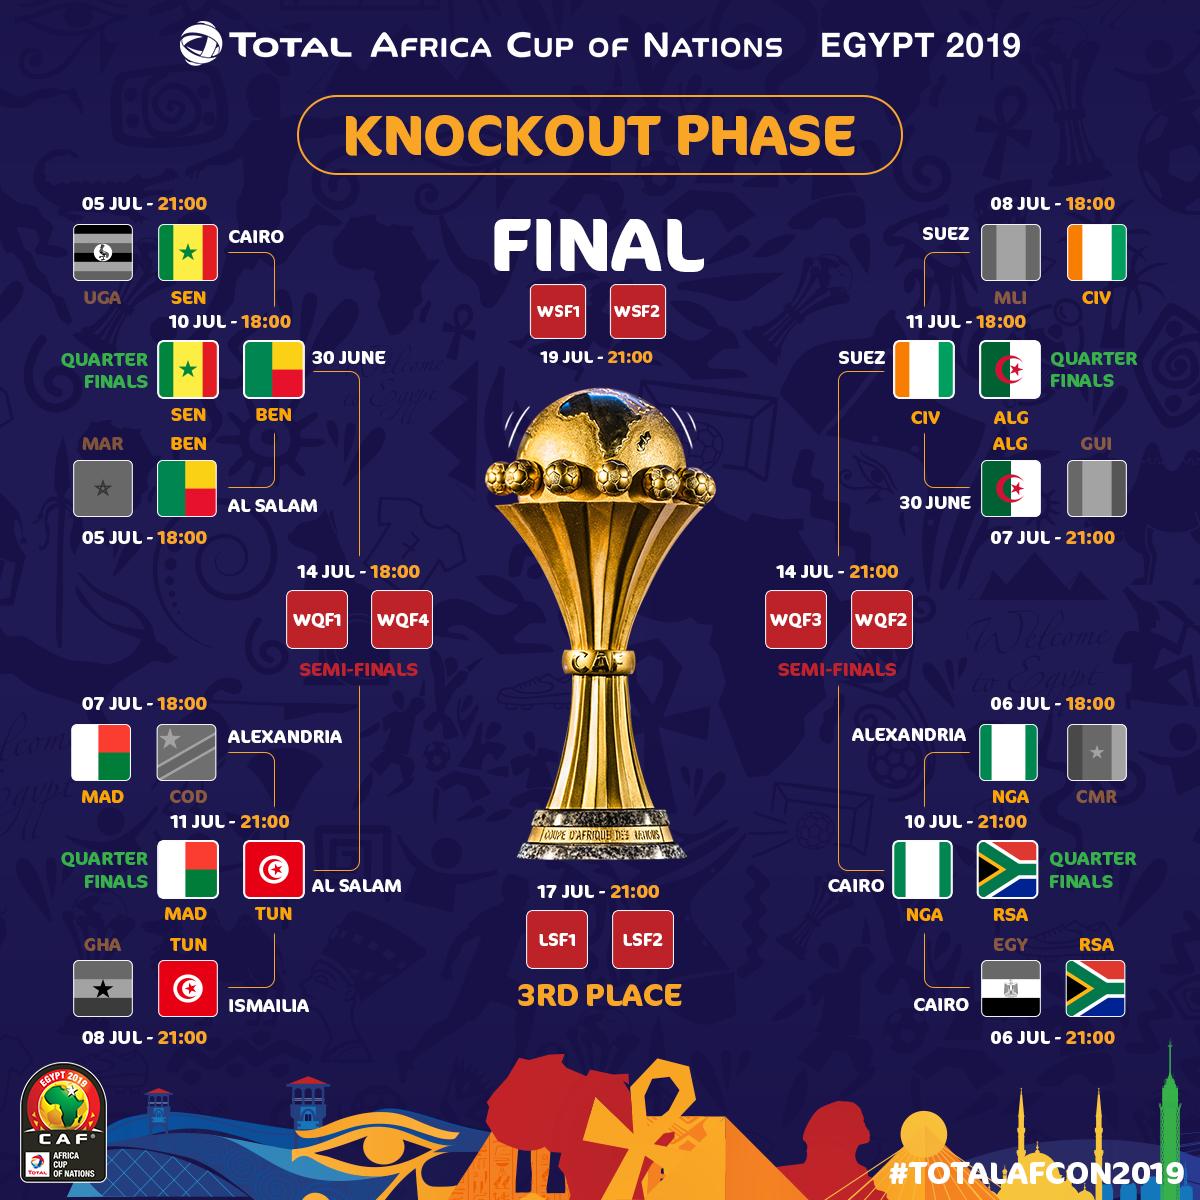 Egypt AFCON 2019 Schedule of the Quarter-finals, Top Teams, Matches, Kick-Off Times, Fixtures, Venues, Standings, Referees For Tournament, Results etc.